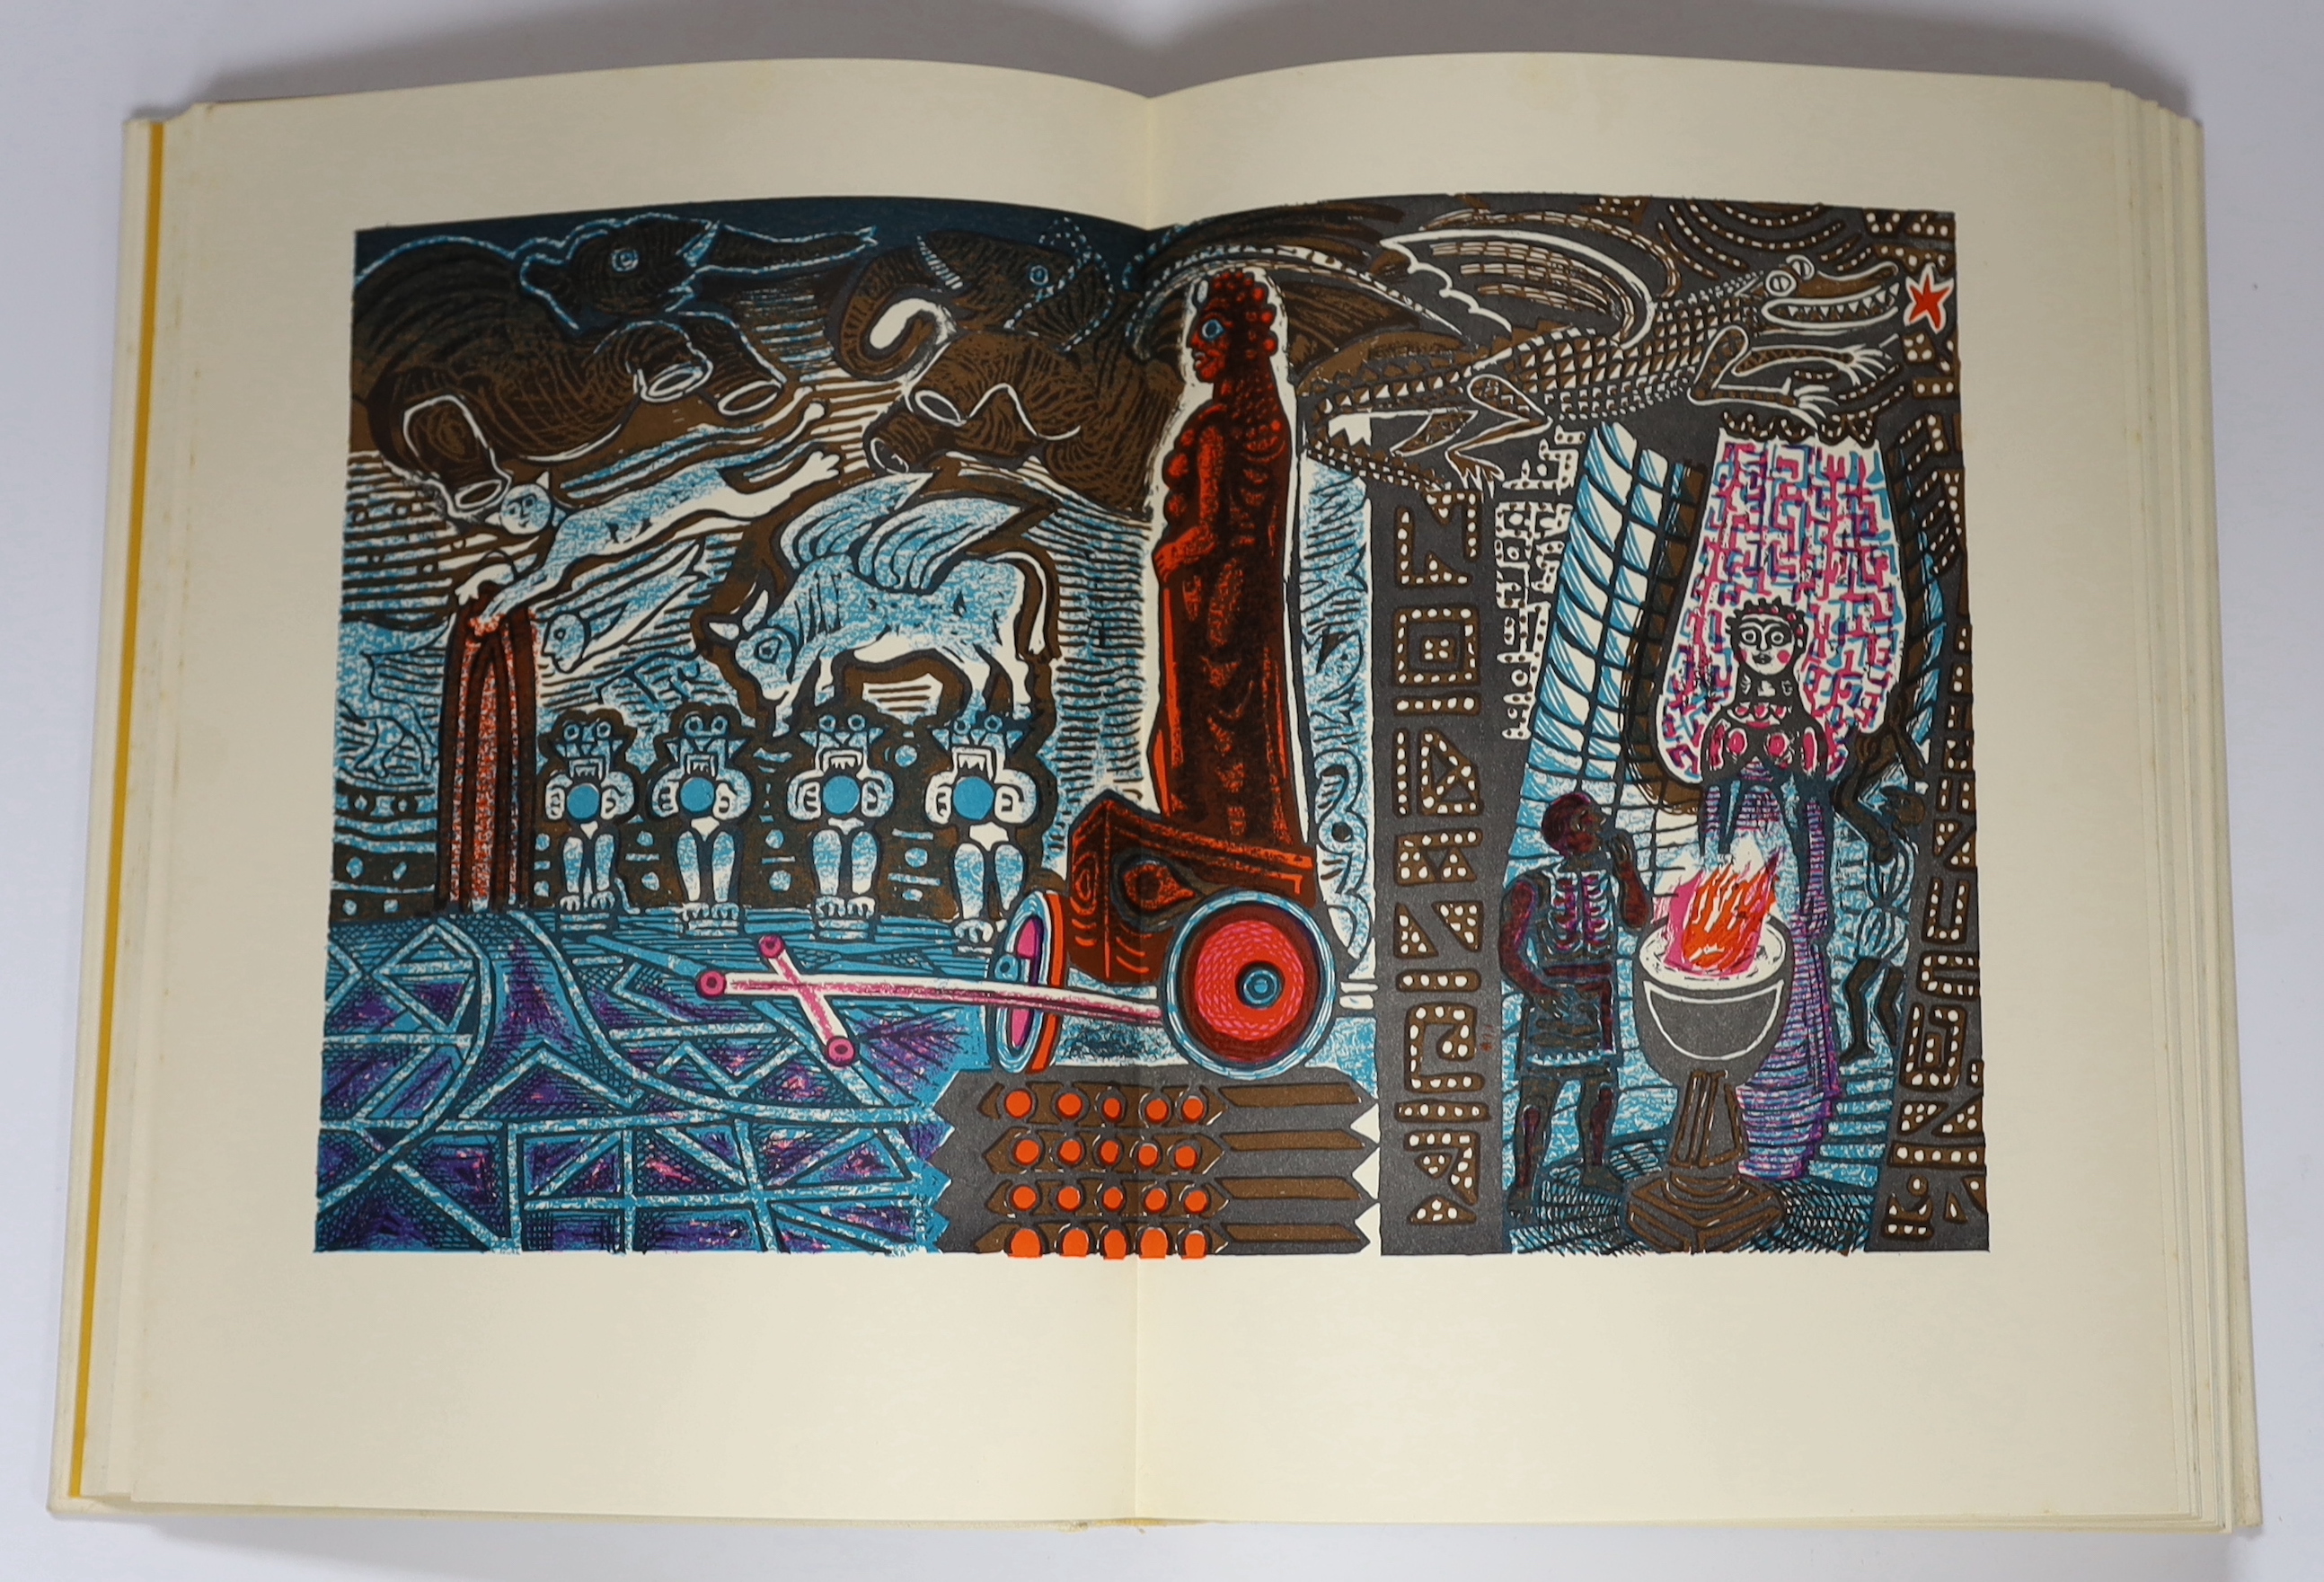 Flaubert, Gustave - Salammbo, one of 1600 signed by the illustrator Edward Bawden, 4to, original cream buckram, with 8 double-page plates, The Limited Editions Club, University Press, Cambridge, 1960, in slip case.